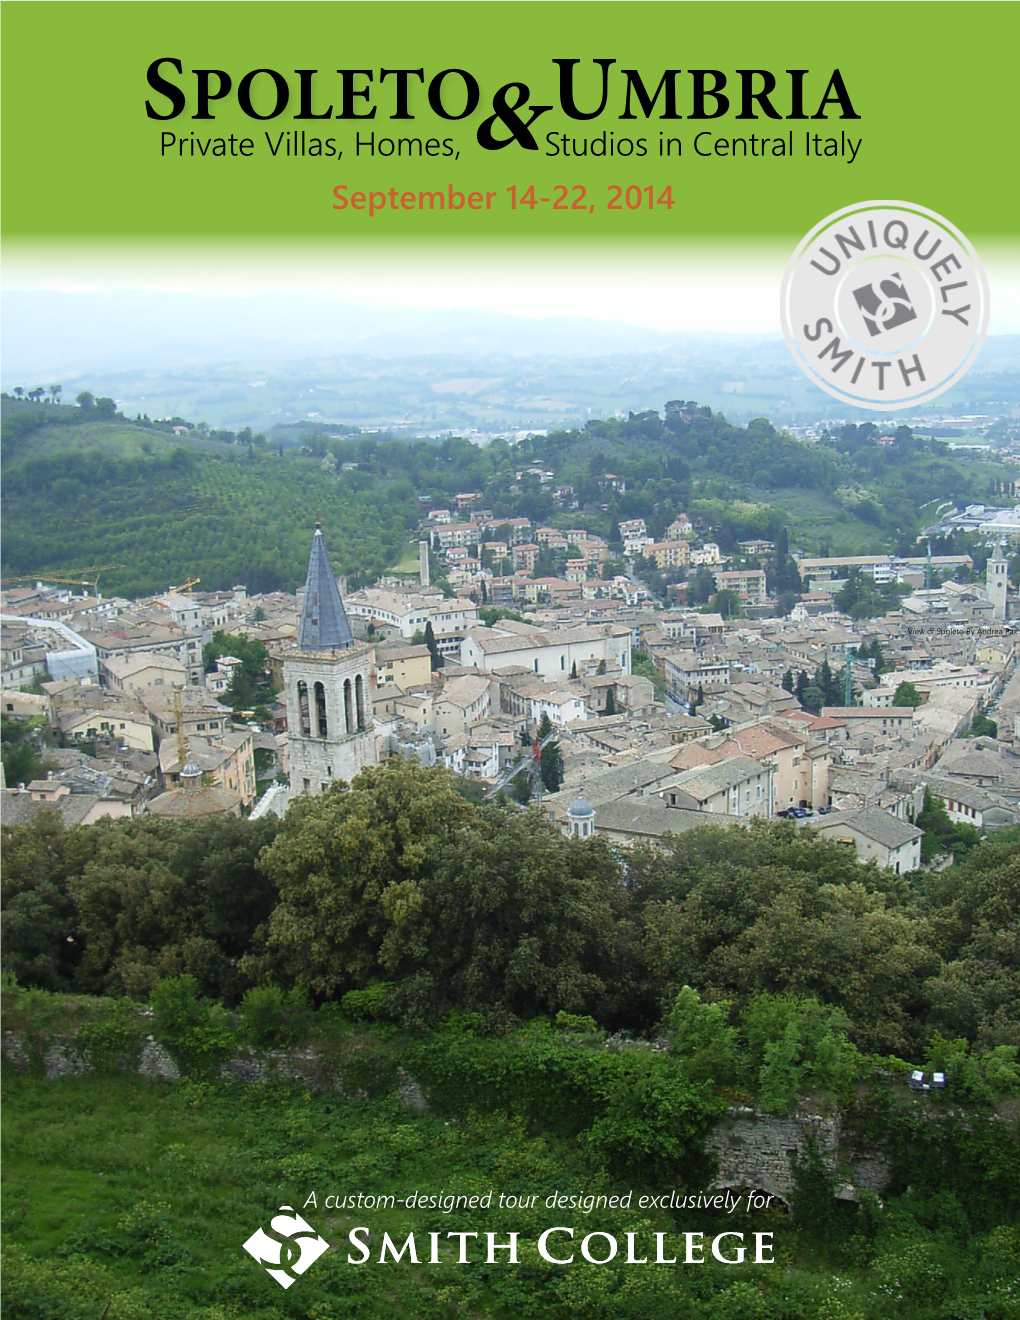 SPOLETO and UMBRIA Private Villas, Homes, and Studios in Central Italy September 14-22, 2014